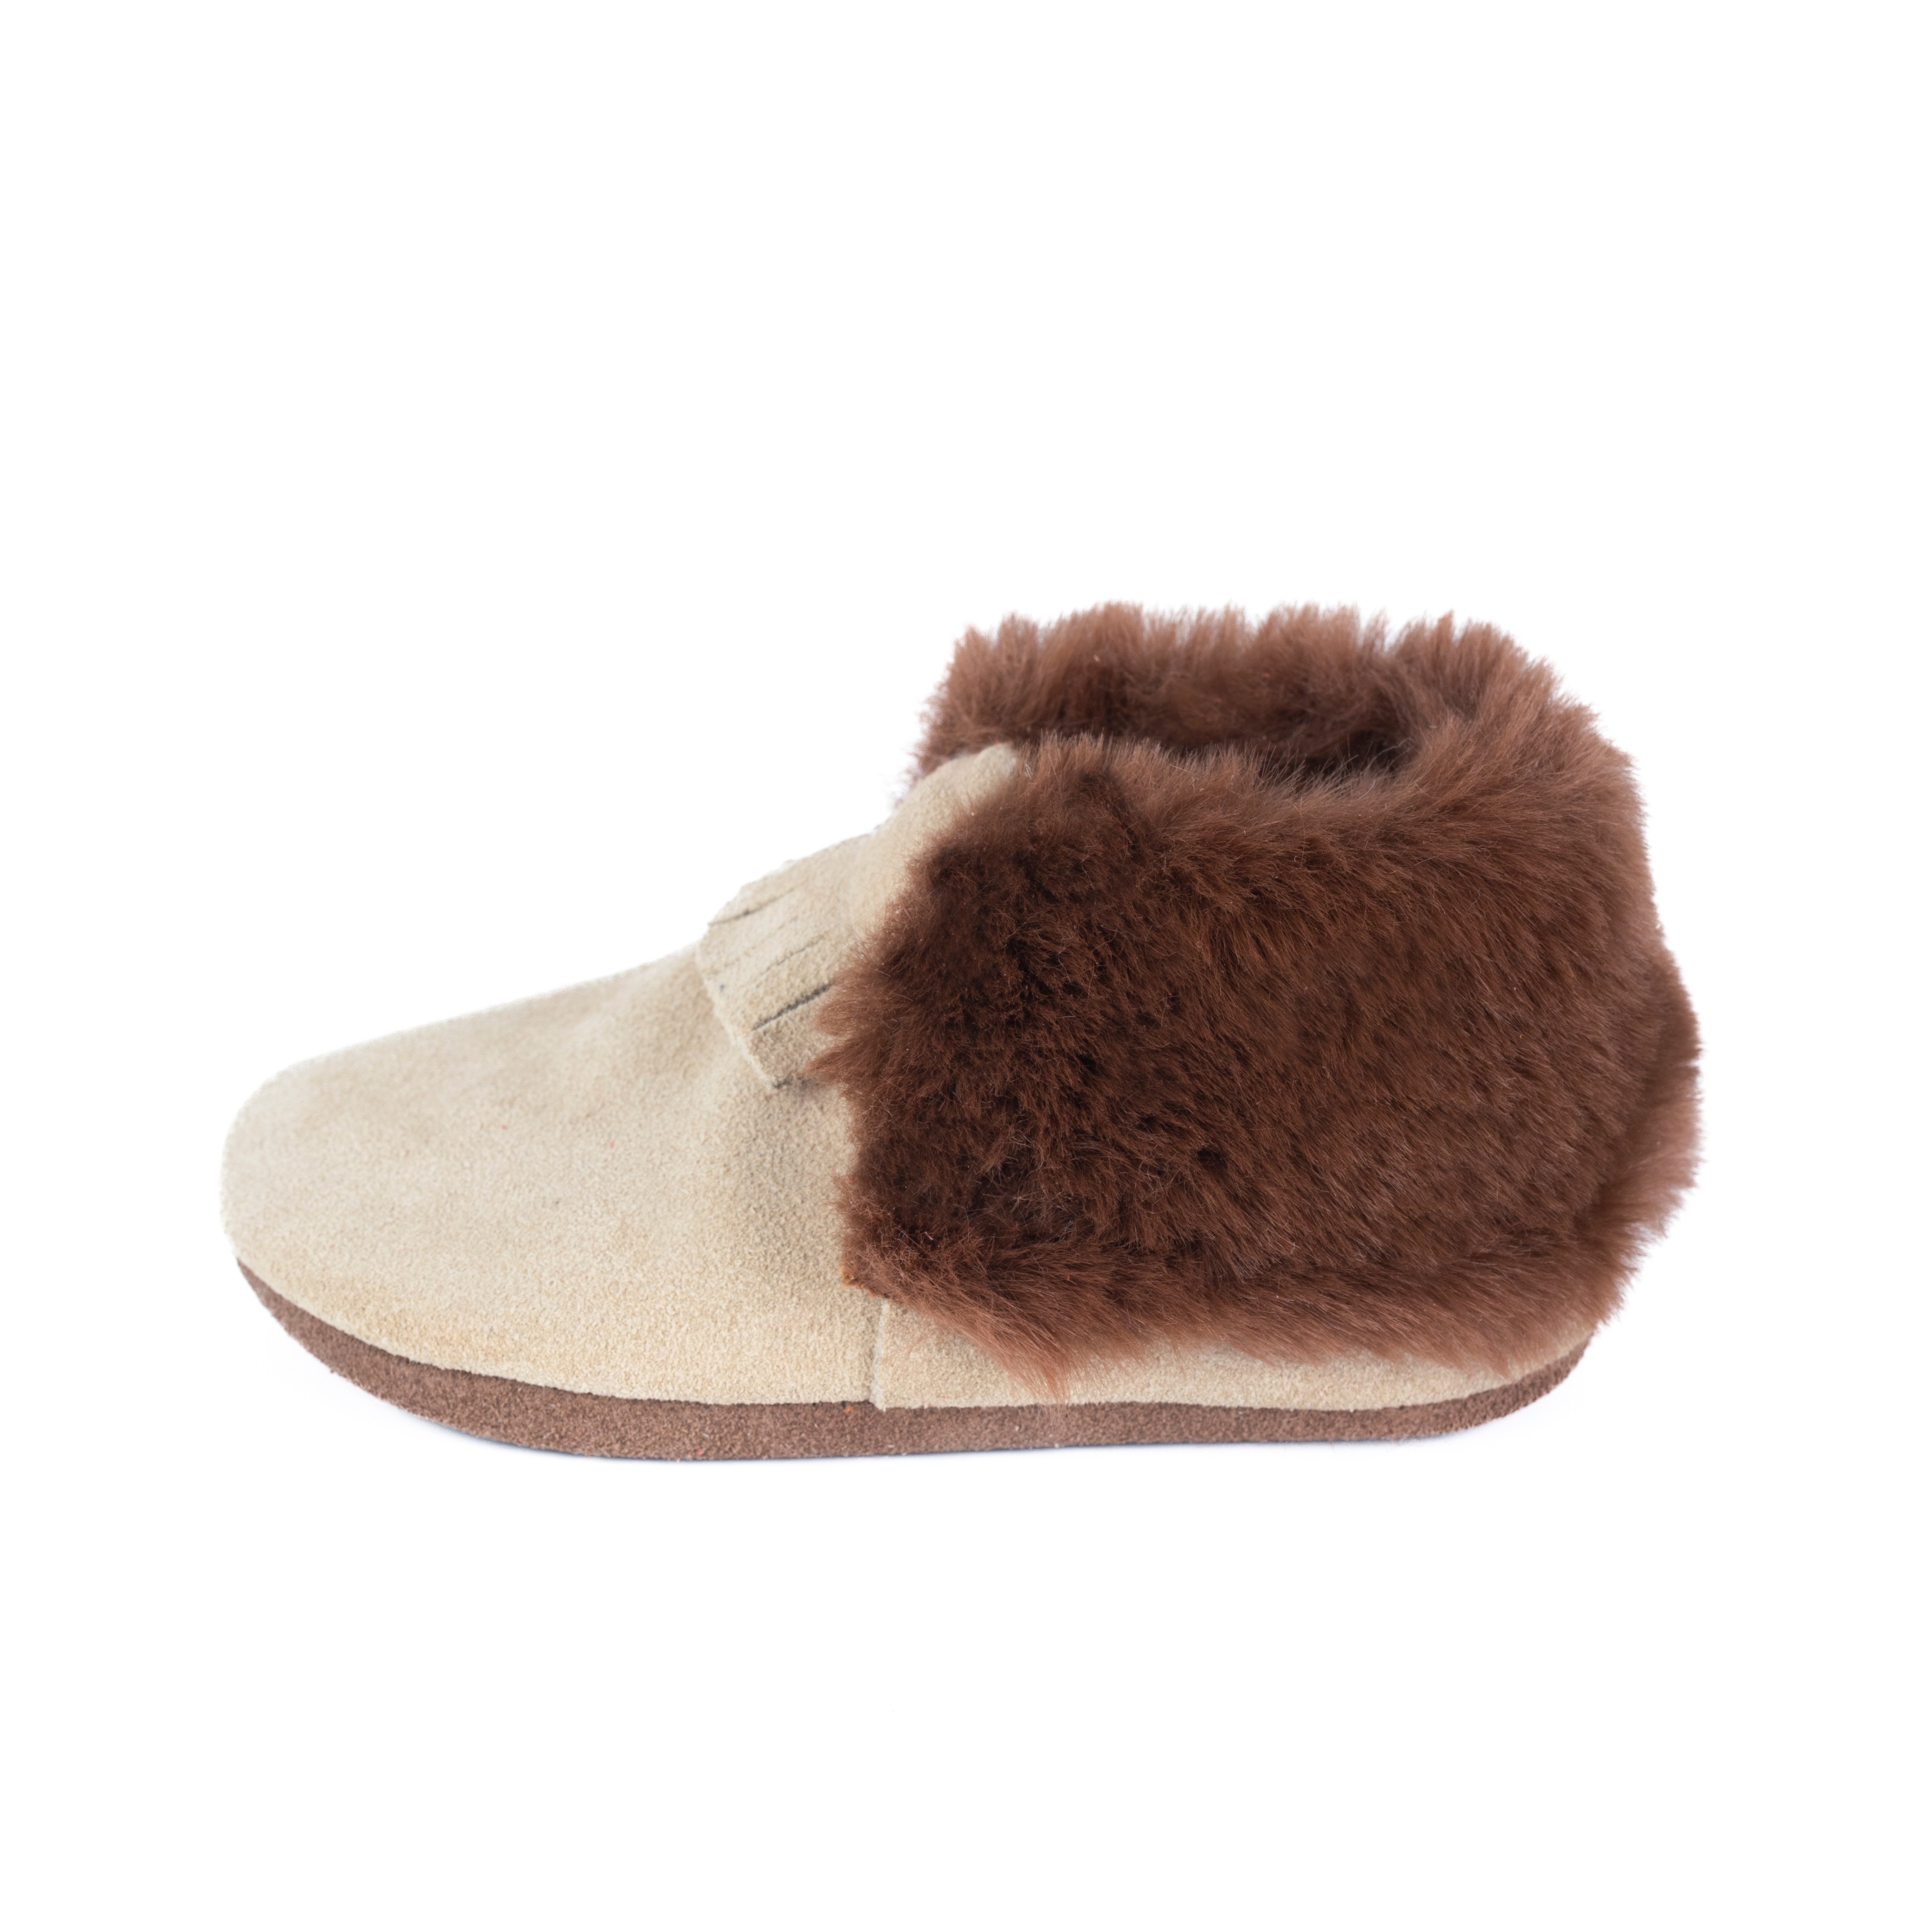 Yoyo Junior Bootie genuine leather suede in cream with outer fur detail